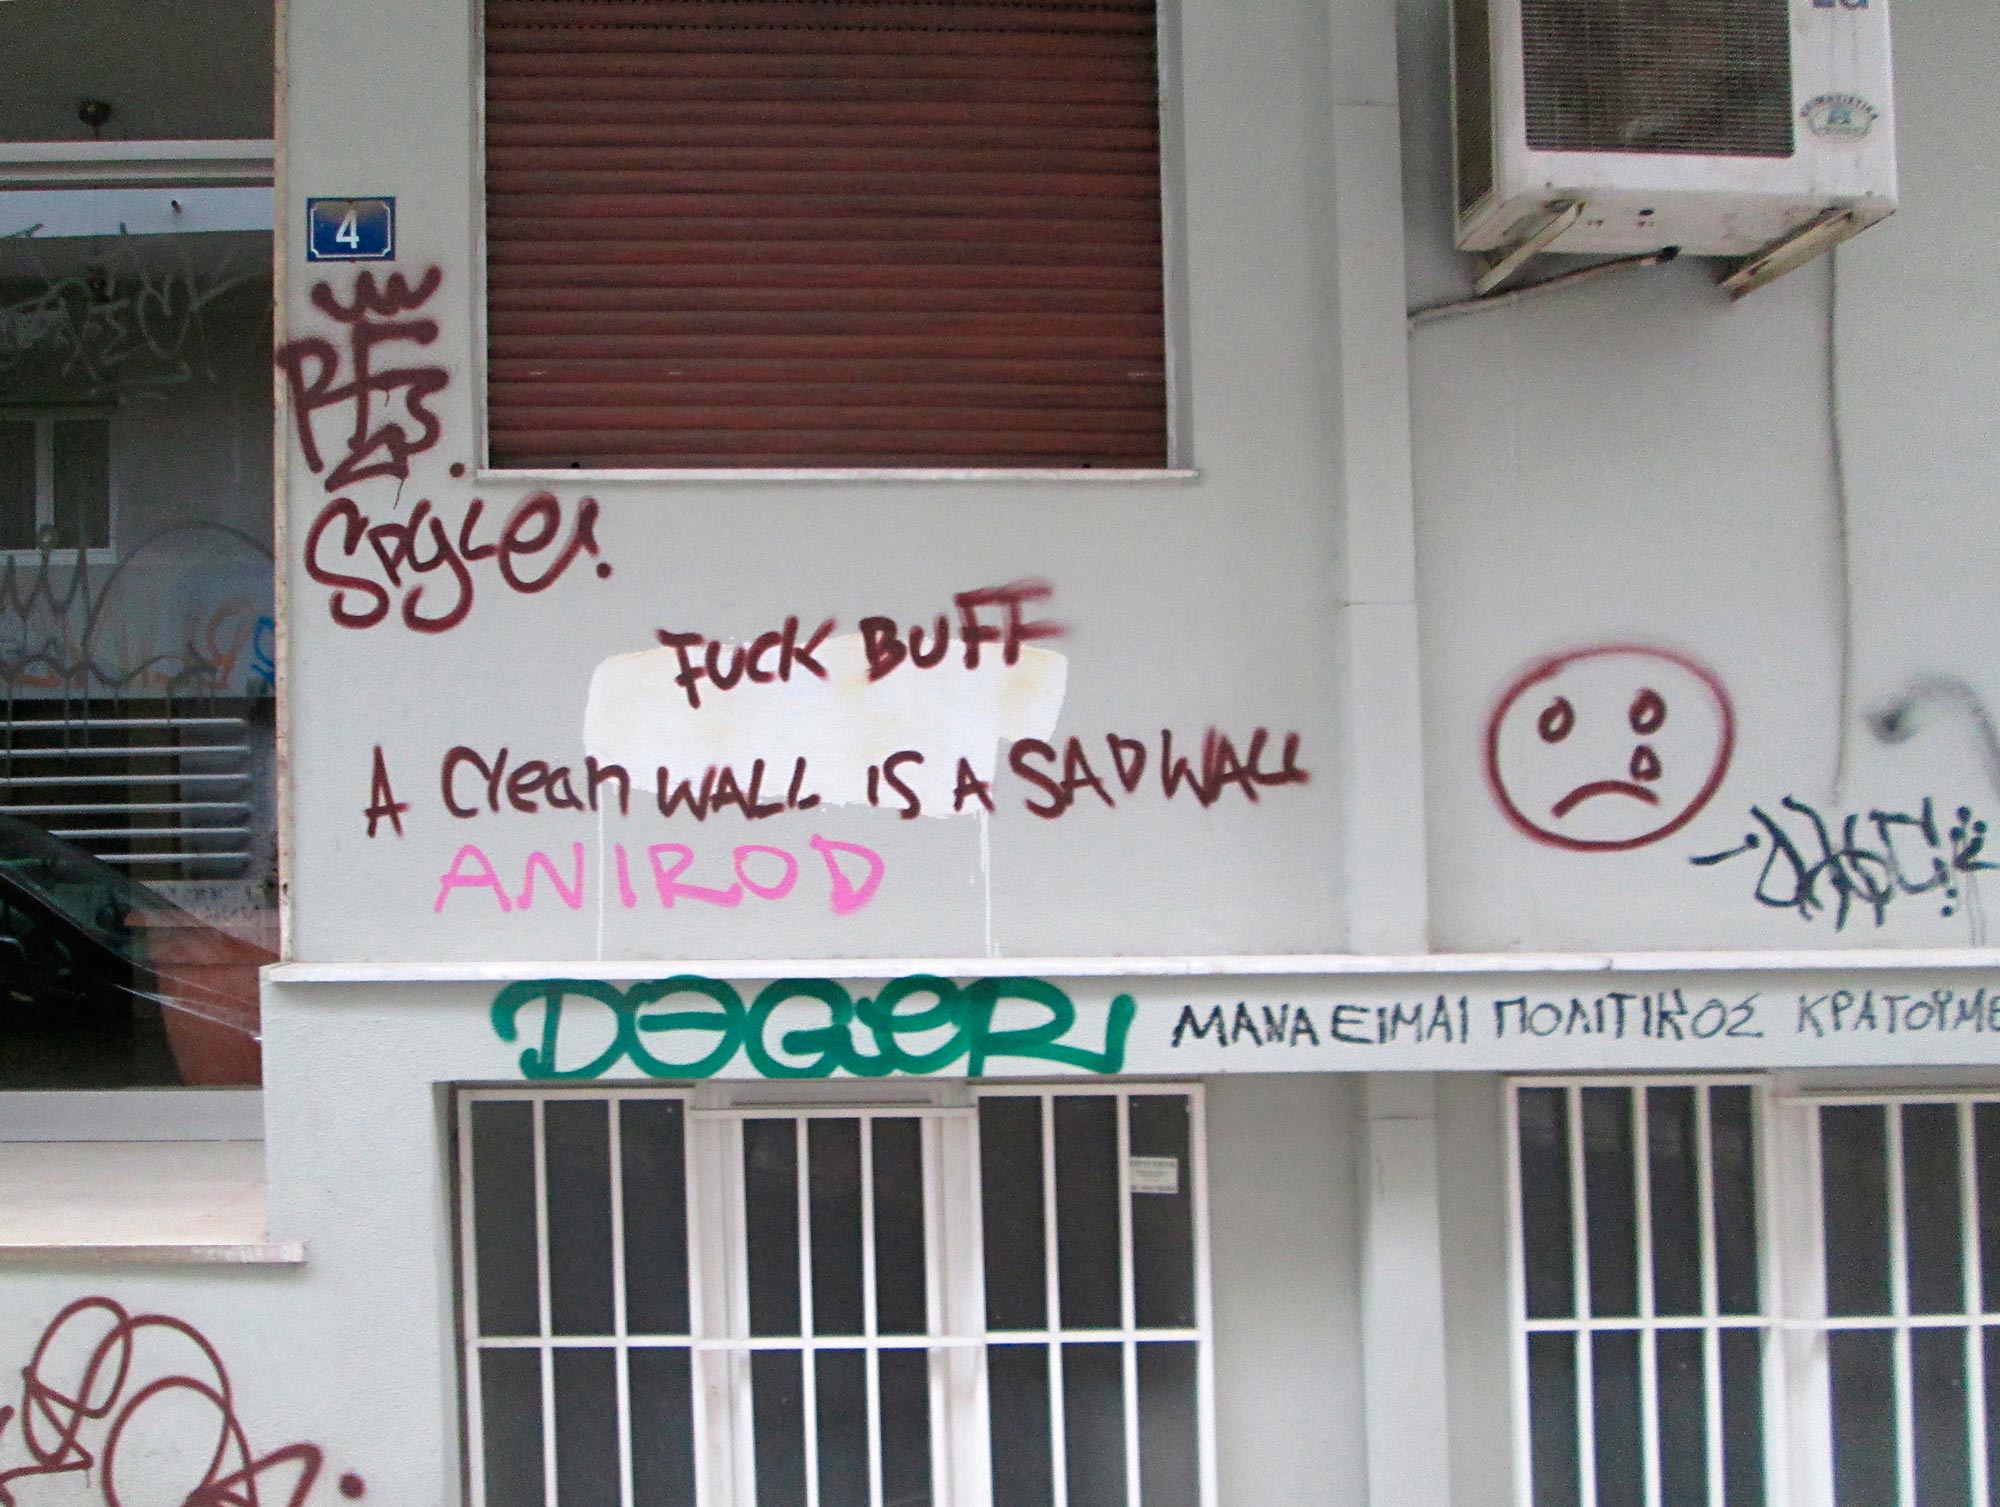 Anonym: A clean wall is a sad wall